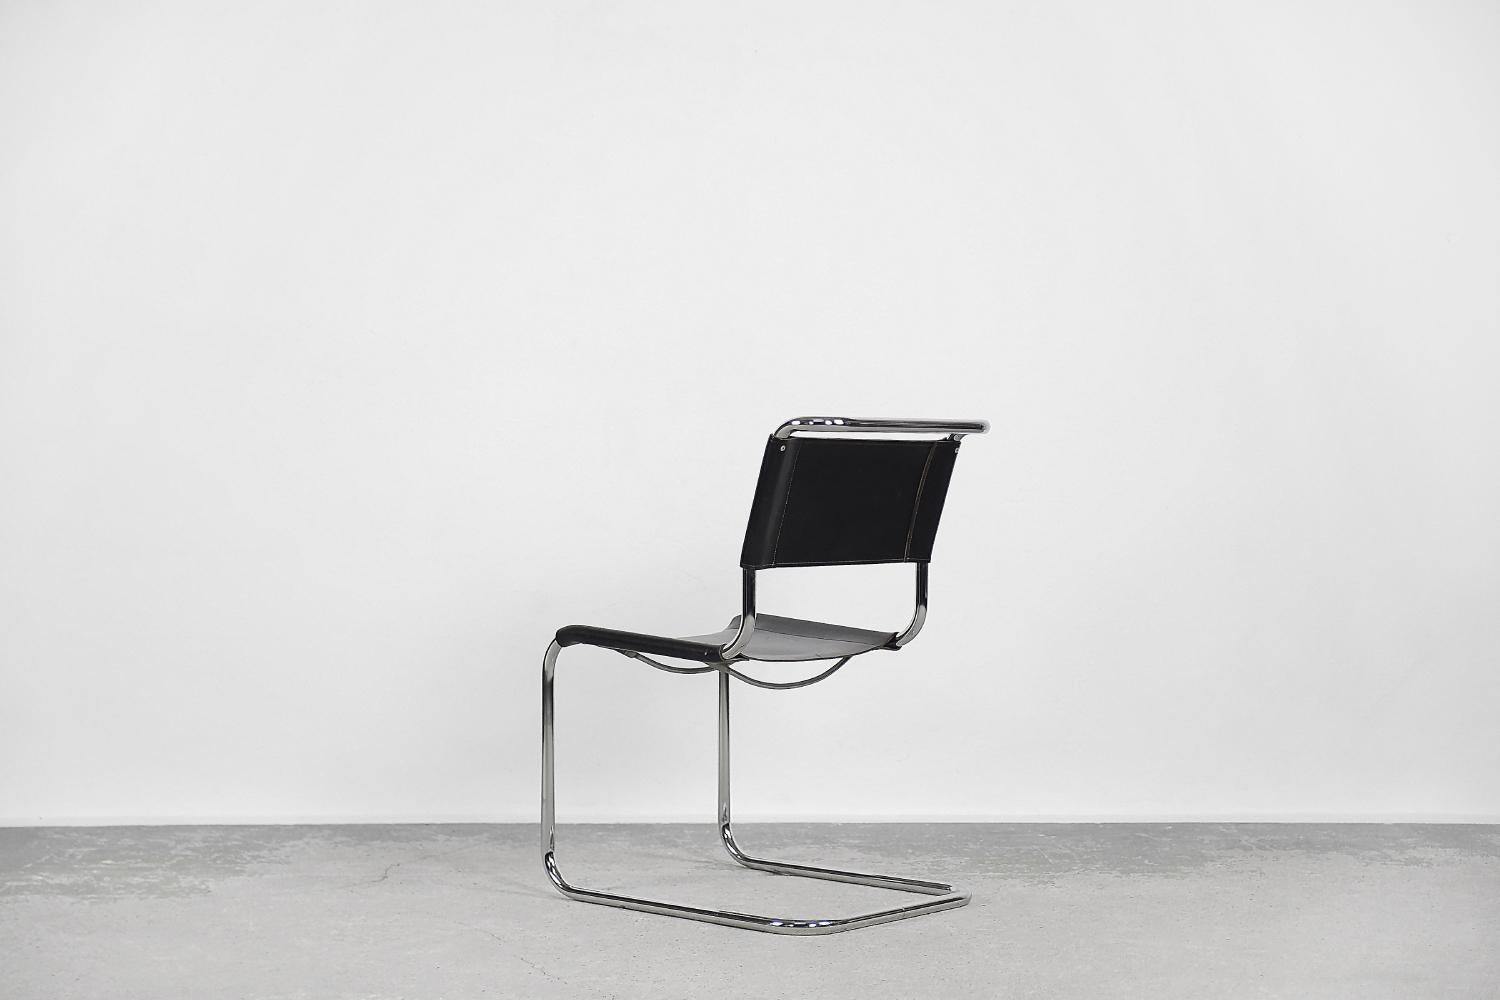 This S33 chair by Mart Stam is a design icon from 1926. It was produced by the German Thonet manufactory. Our piece comes from the 1960s. It is the first cantilever chair in the history. Mart Stam experimented with gas pipes which he connected by